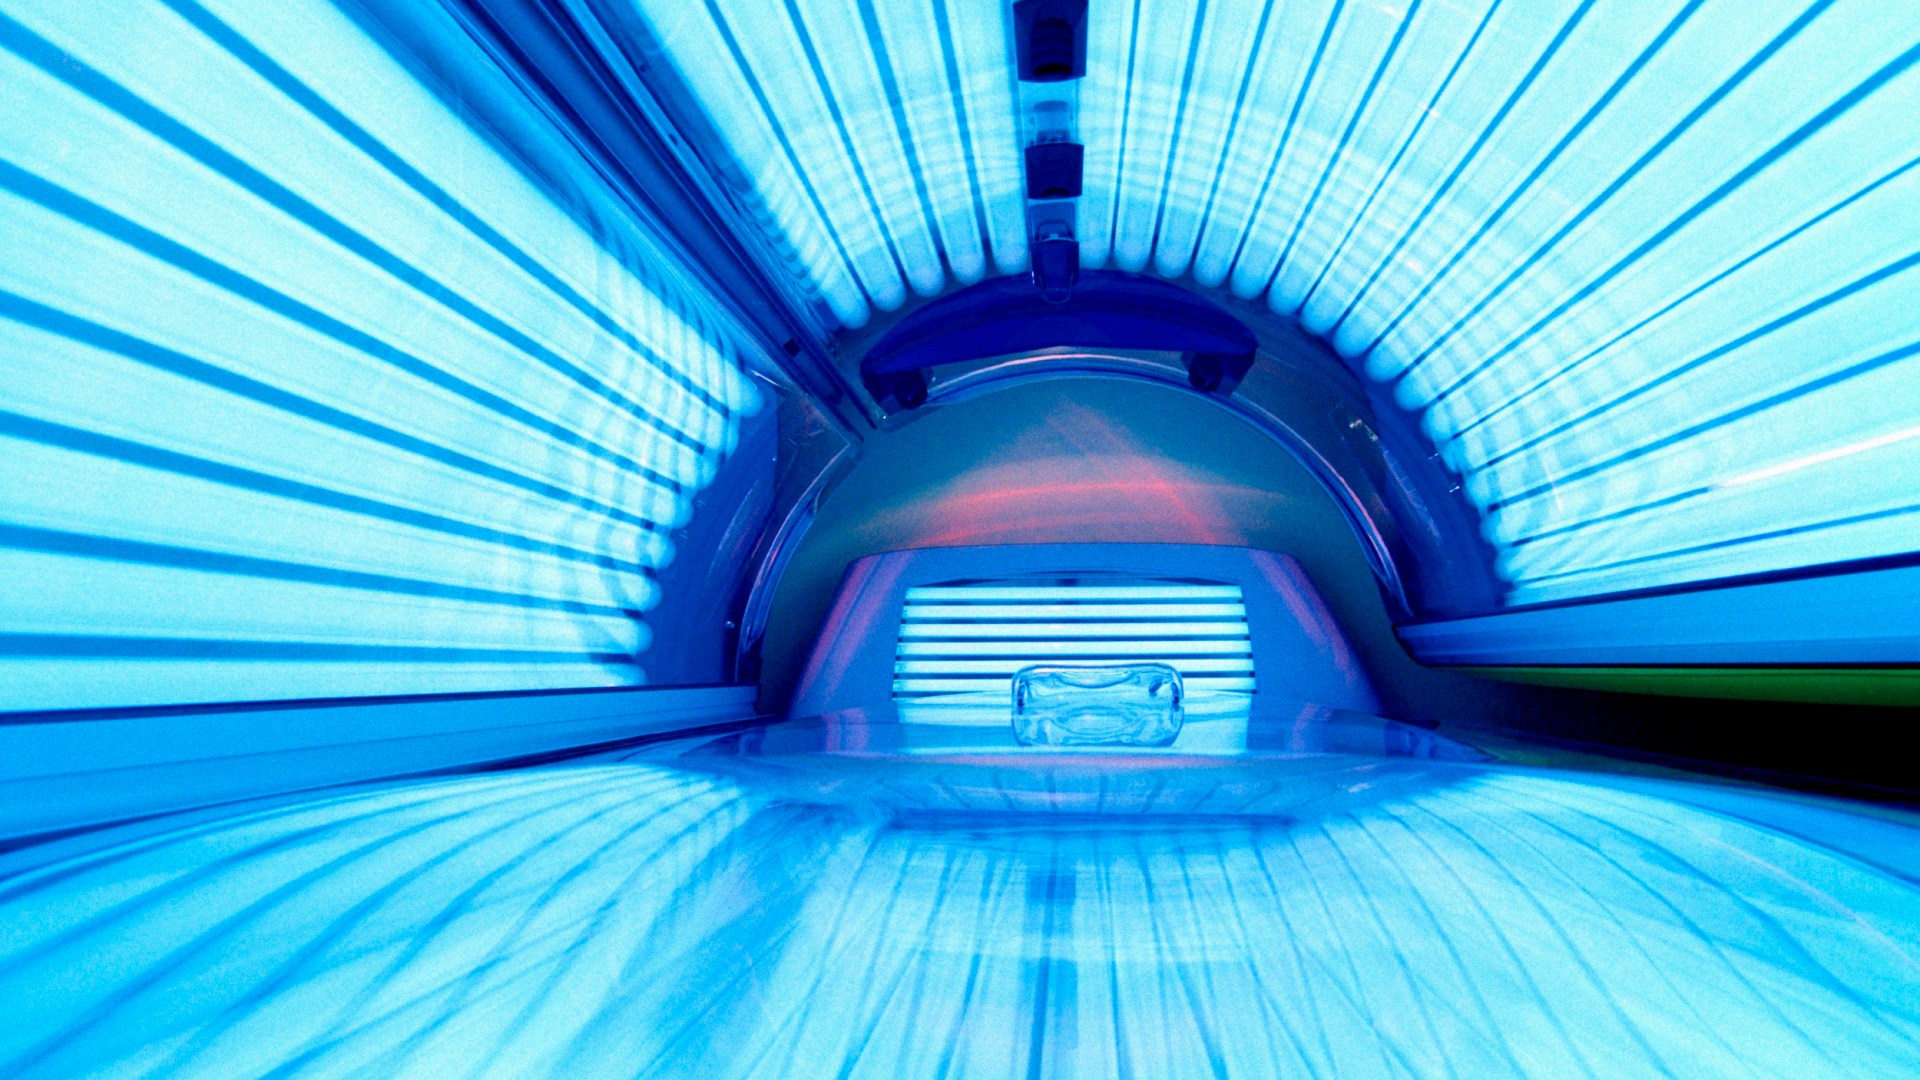 MichealMartin pledges outright banon sunbeds as new data reveals skin cancer surge & 13k Irish people diagnosed yearly [Video]